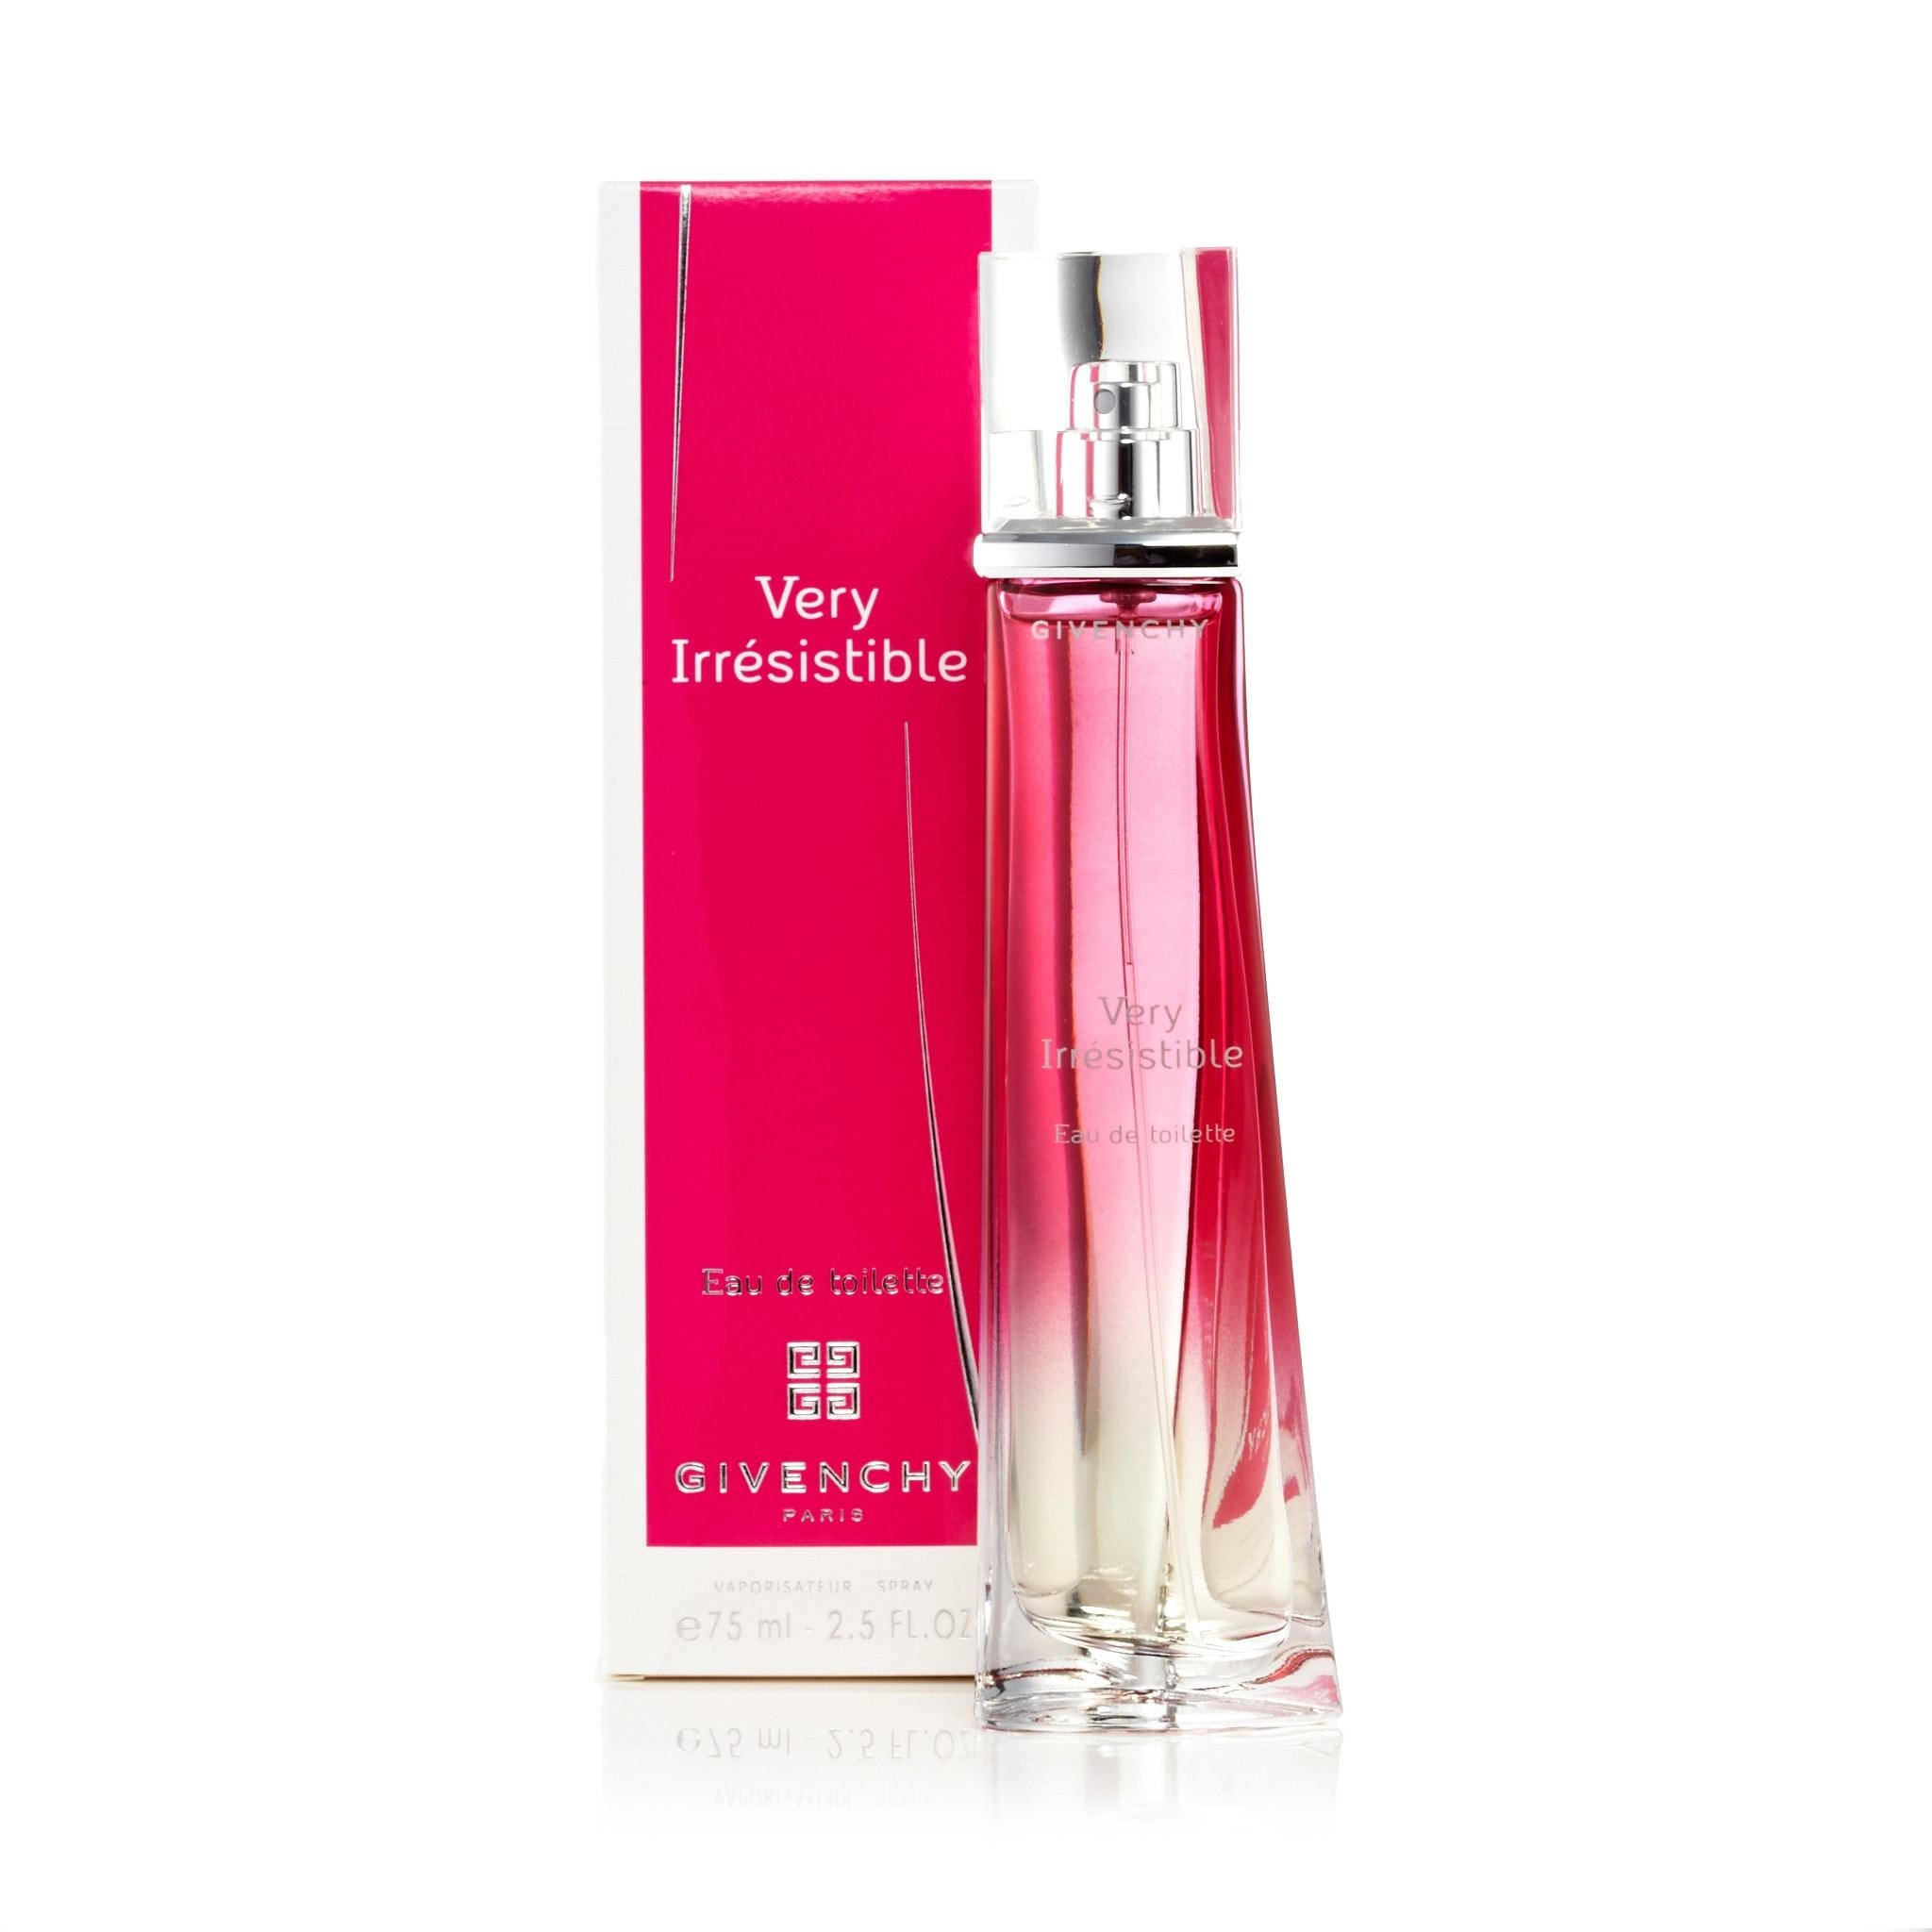 øve sig Aftensmad fond Very Irresistible Eau de Toilette Spray for Women by Givenchy – Perfumania